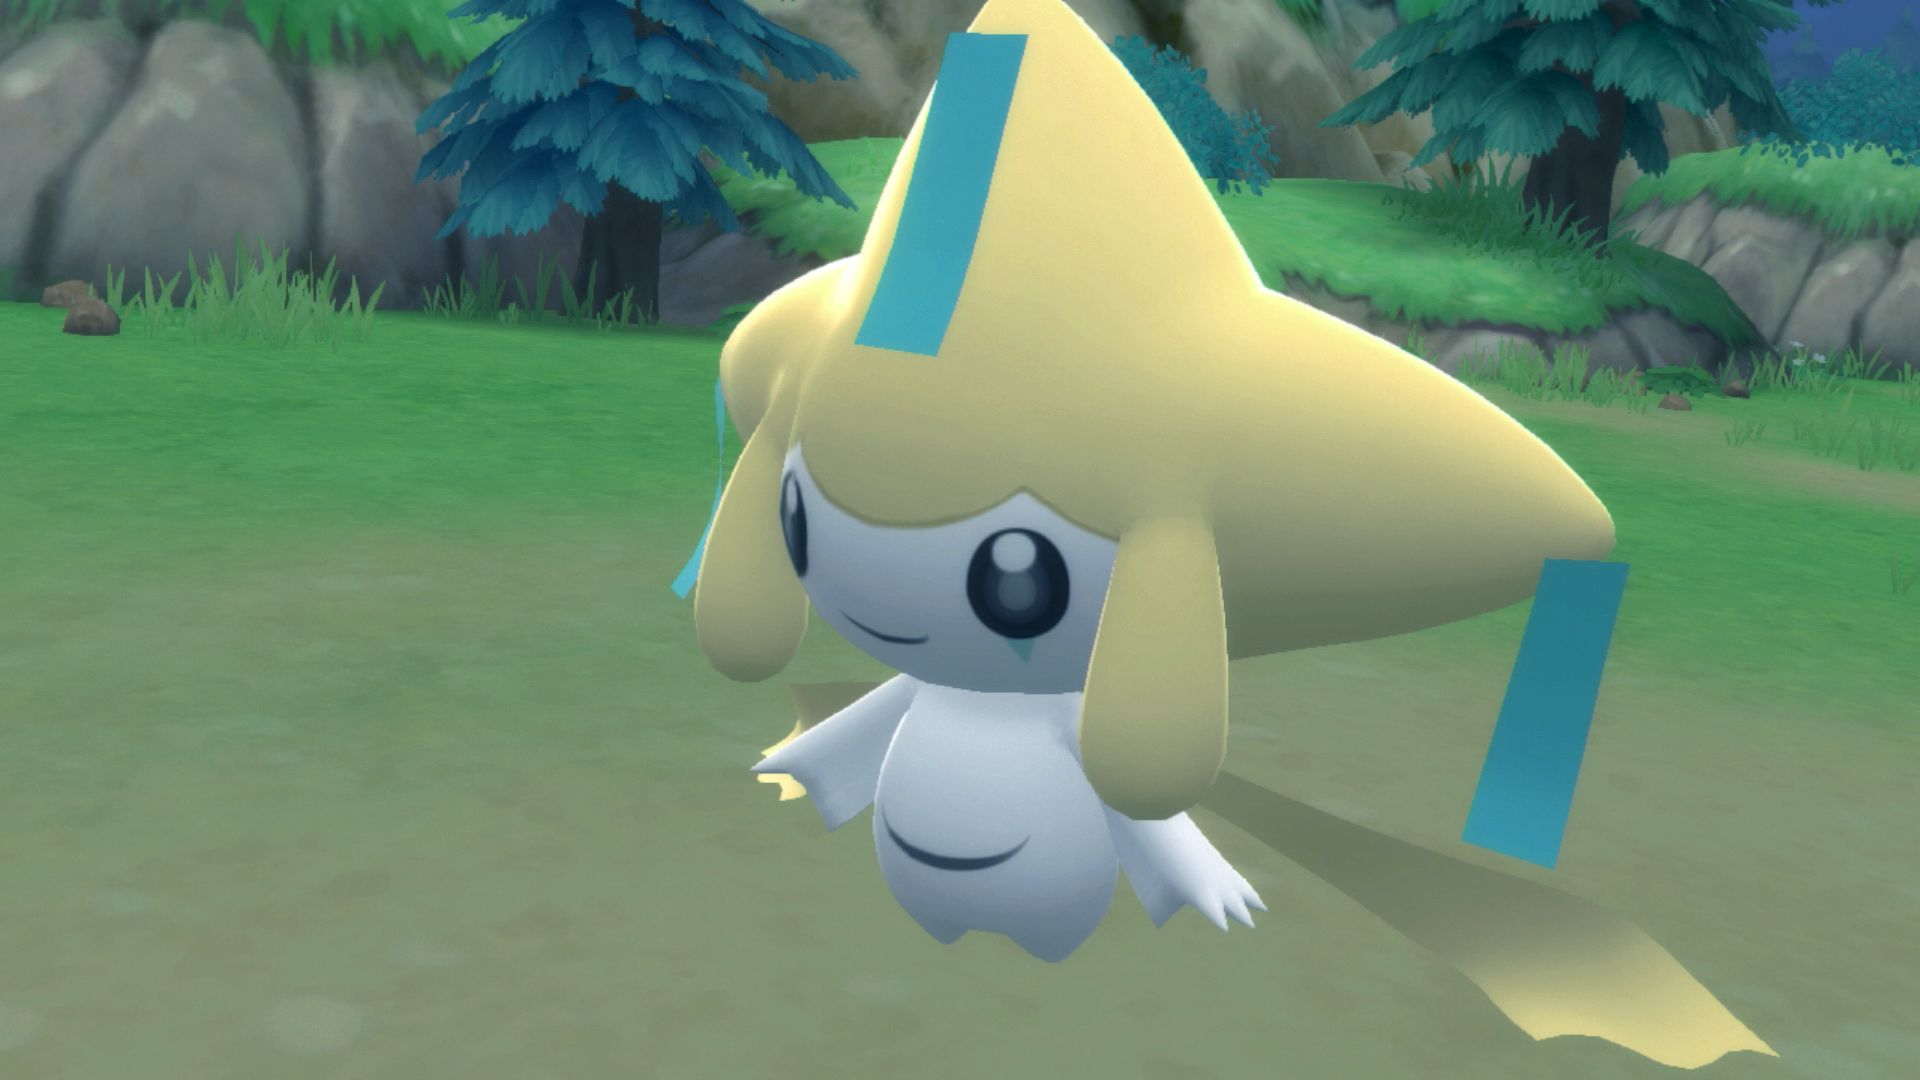 Pokémon Legends: Arceus finally gives players a type chart within the game  - AUTOMATON WEST